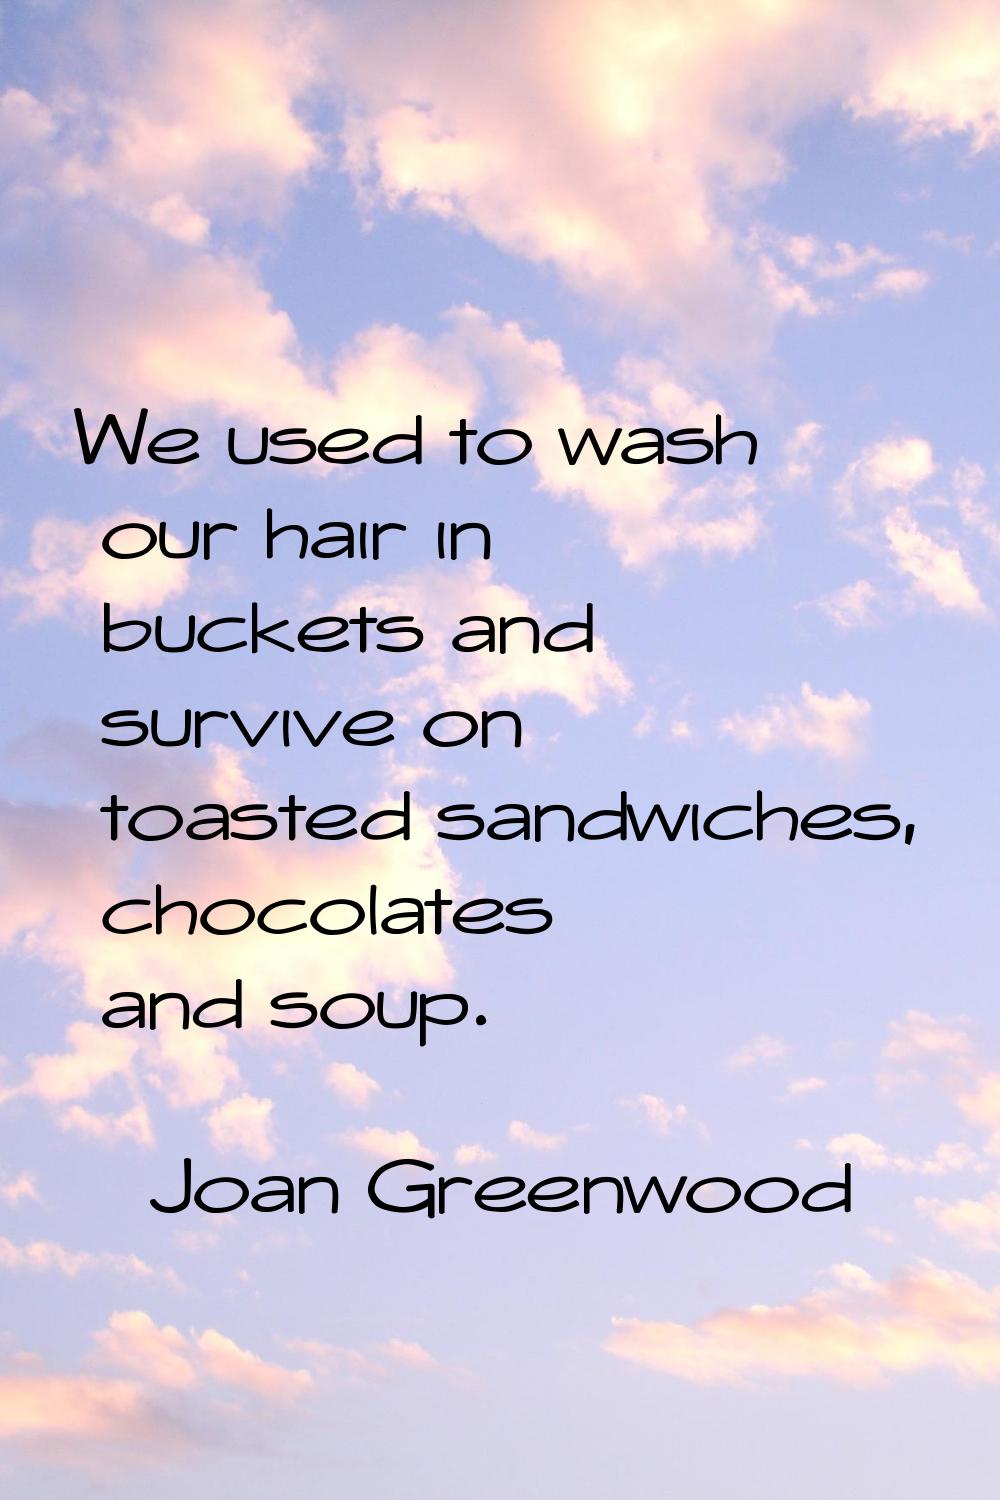 We used to wash our hair in buckets and survive on toasted sandwiches, chocolates and soup.